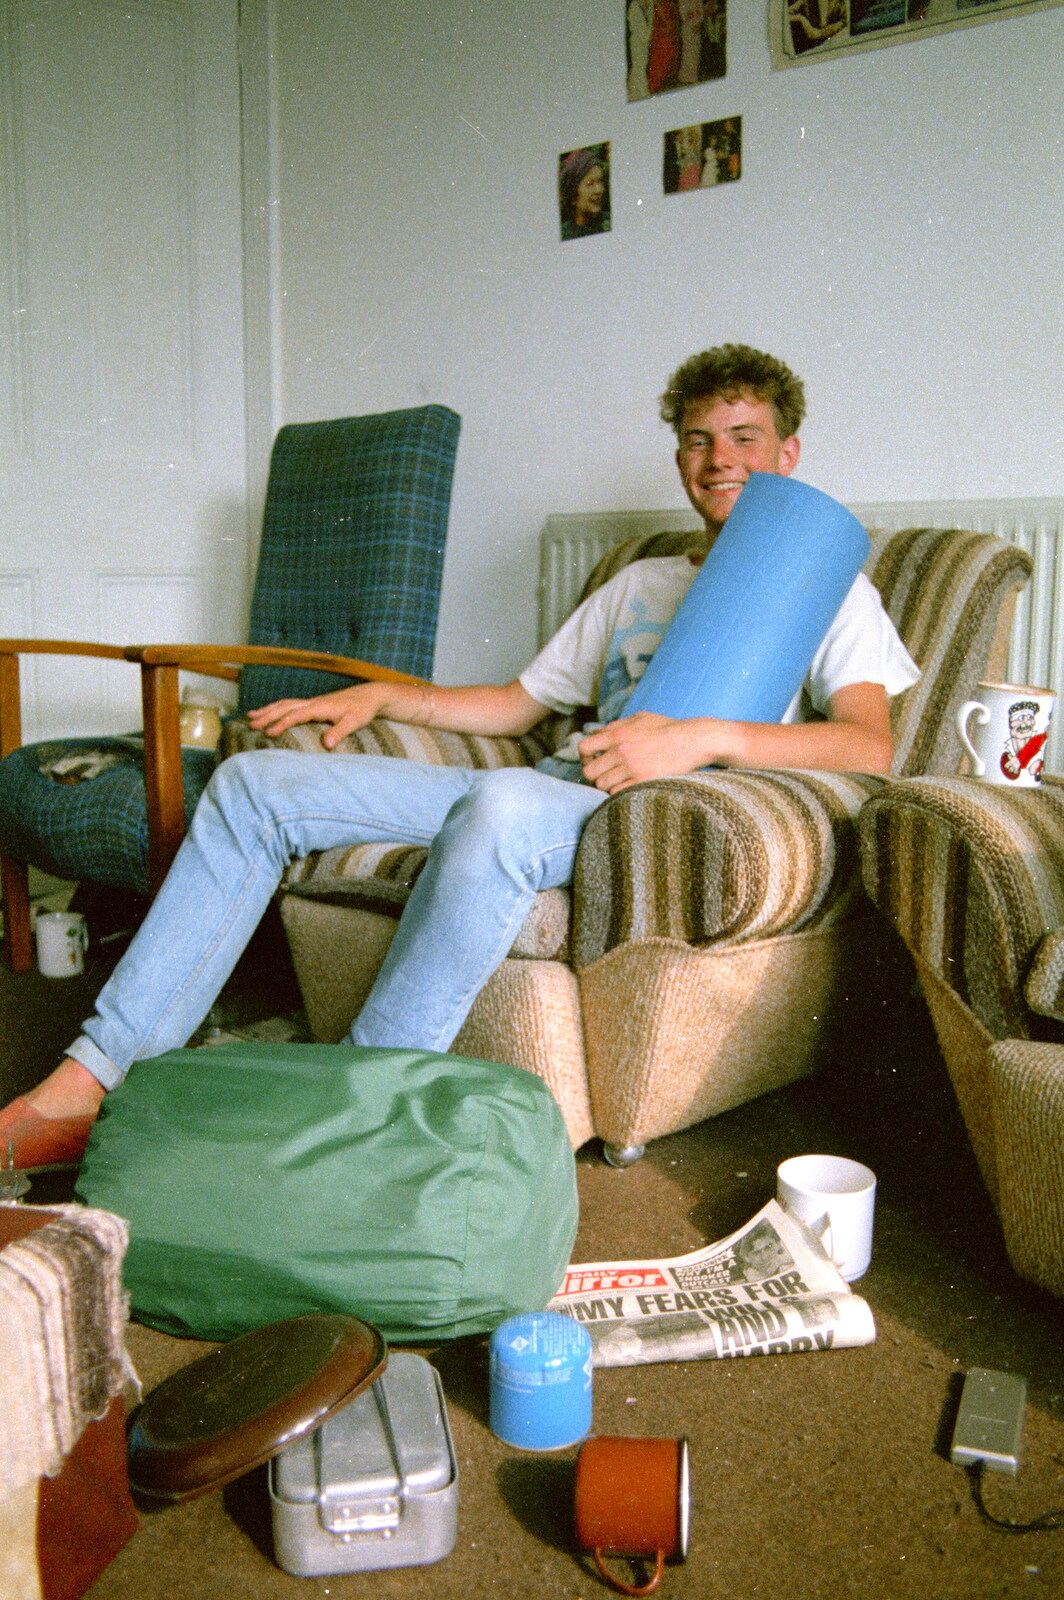 Malc gets ready to leave on a camping trip from Uni: Riki And Dave's Place, Sutherland Road, Plymouth - 12th May 1986